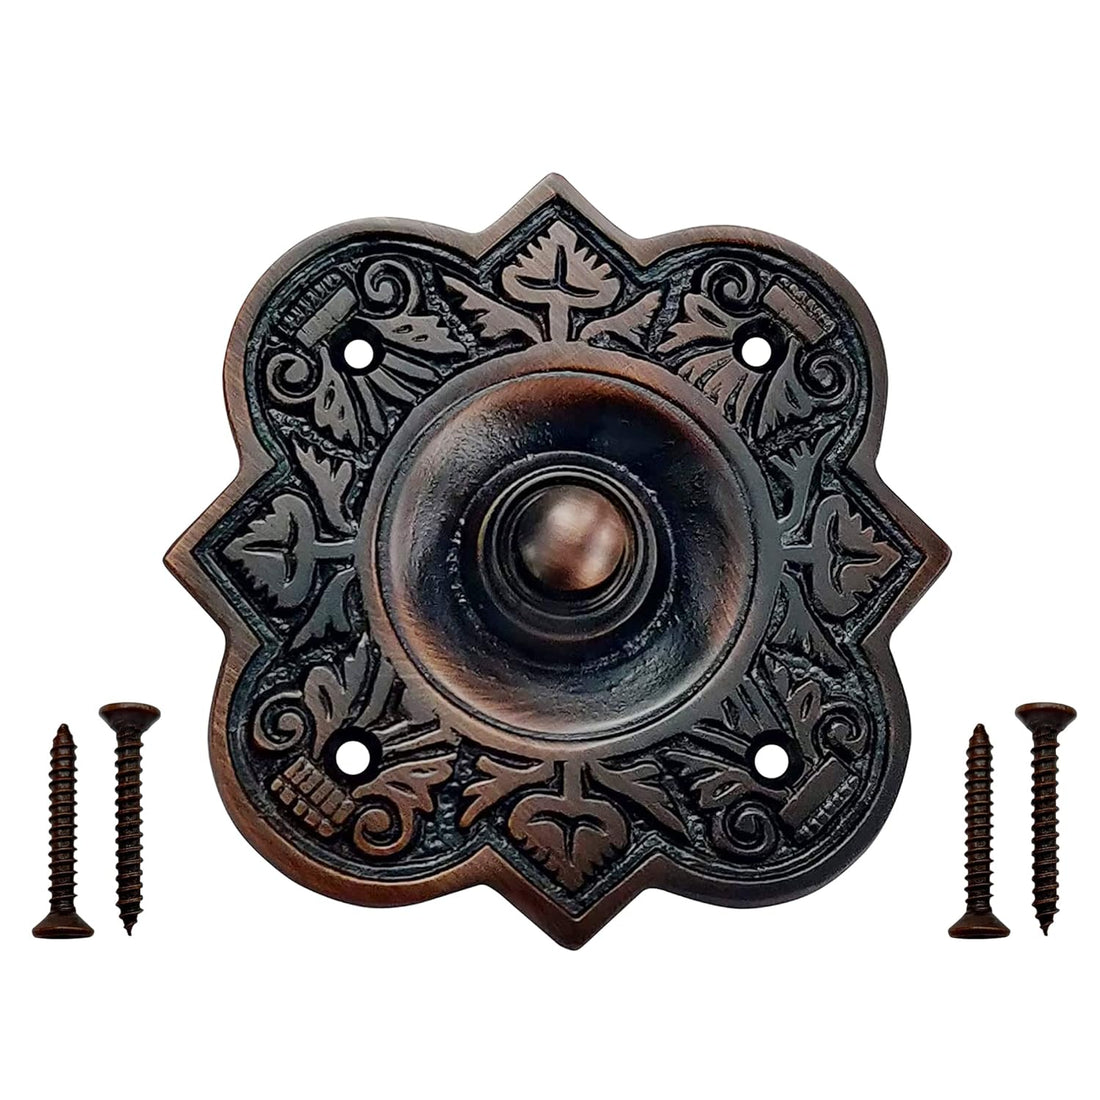 Akatva"Gila" Decorative Doorbell Button – Finest Quality Bell Push Button – Easy to Install Calling Bell Button – Vintage Décor Doorbell Button Finely Hand Crafted - Oil Rubbed Bronze Finish